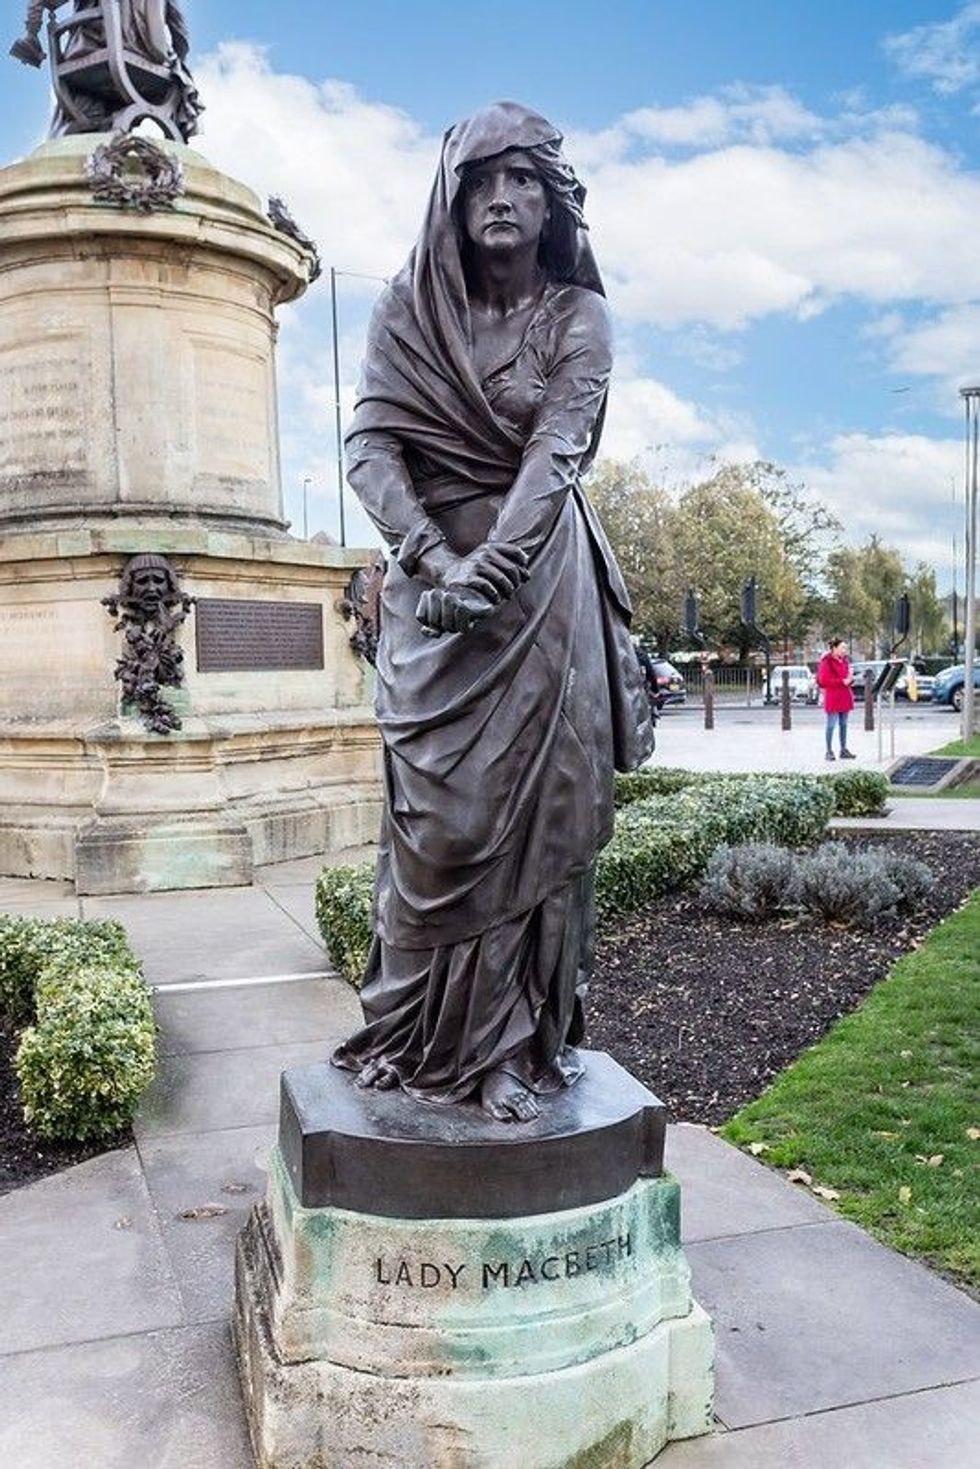 William Shakespeare's character of Lady Macbeth in Bancroft Gardens